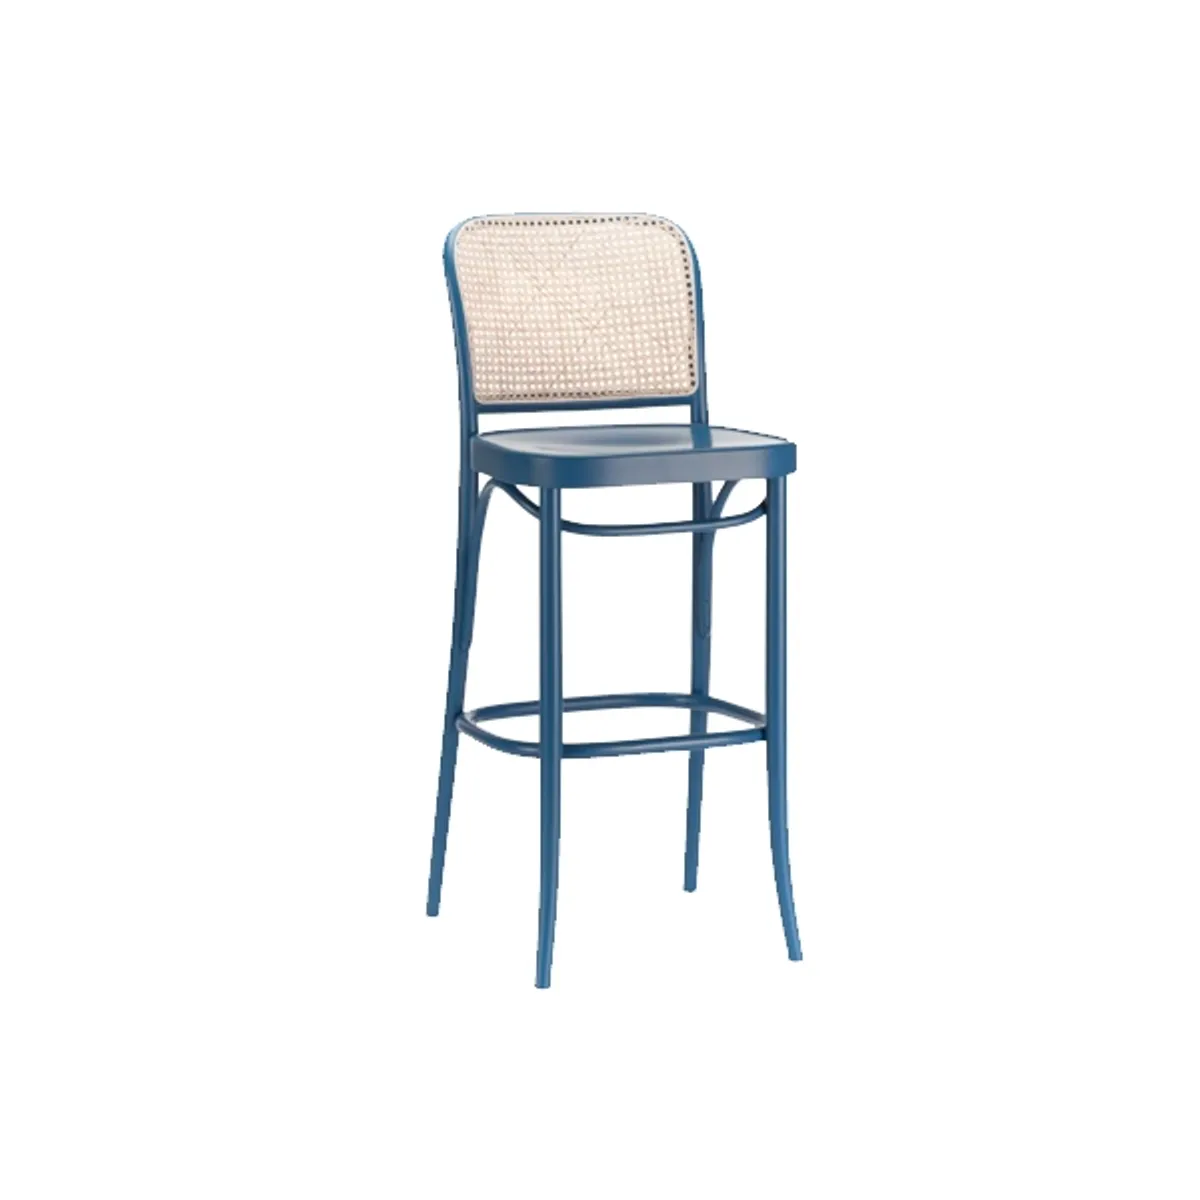 Bombay wood bar stool Inside Out Contracts